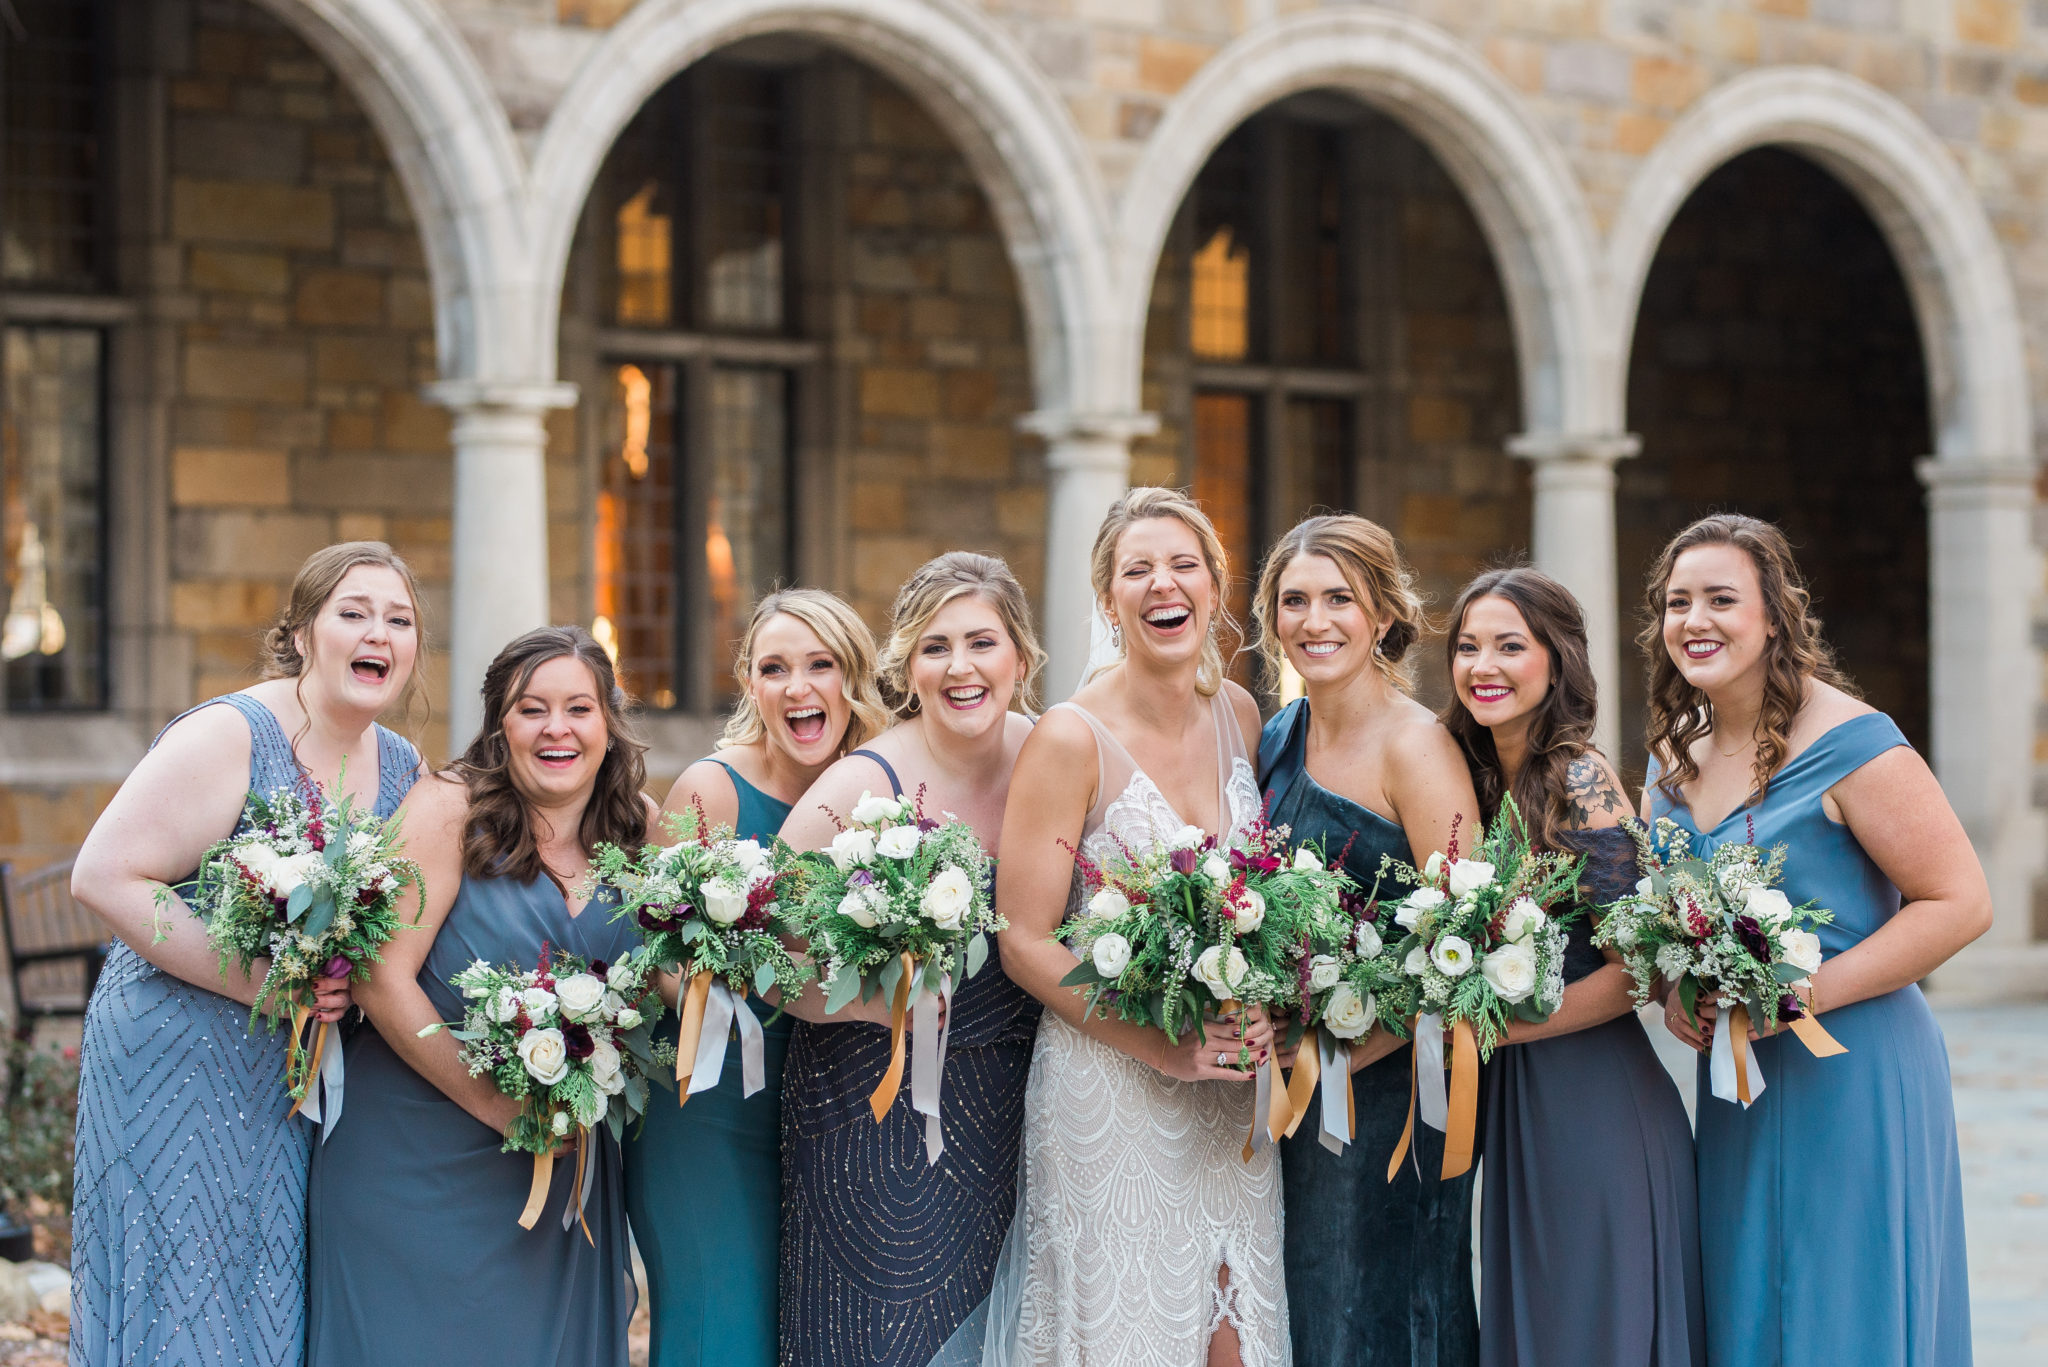 wedding party images, wedding photography in ann arbor, ann arbor law quad photography, bridesmaid dresses, blue bridesmaids dress photography, wedding floral inspiration, ann arbor wedding day, wedding day in winter, wedding party photography, michigan